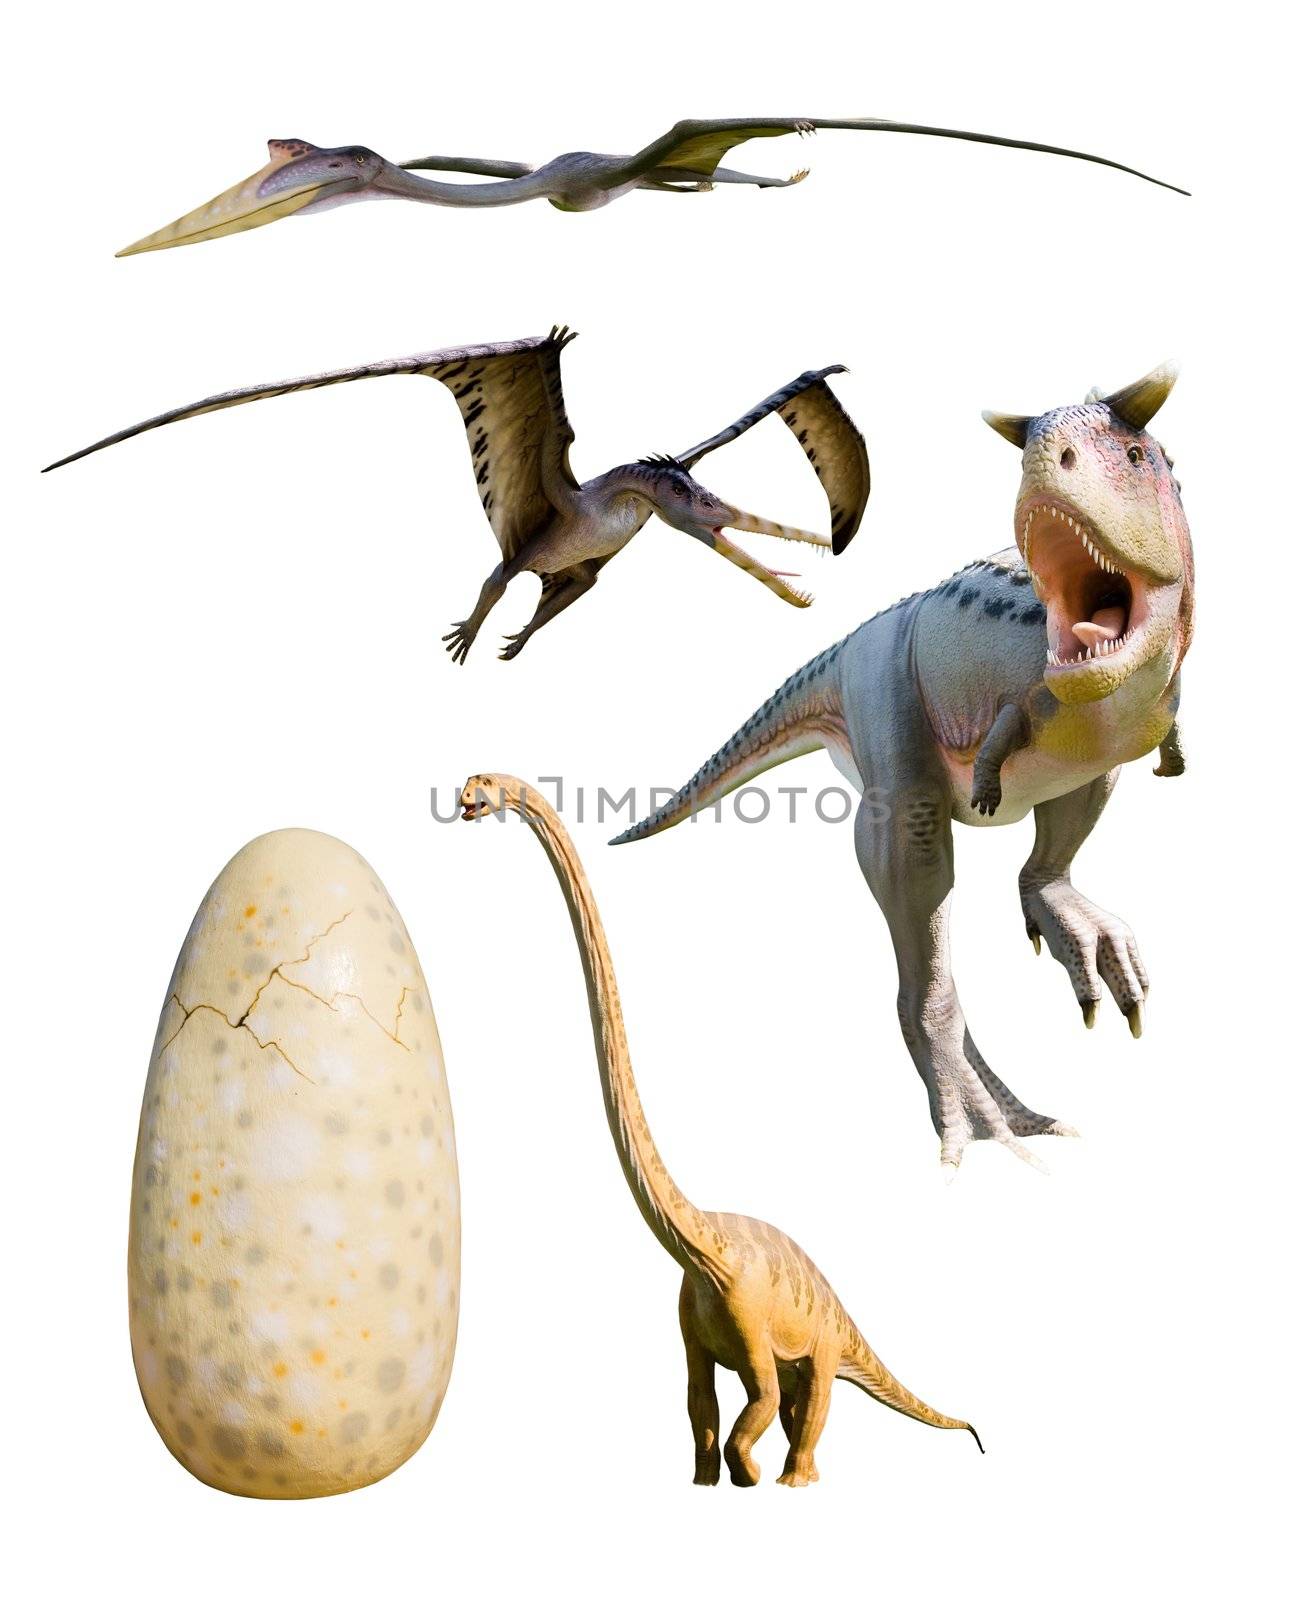 four most popular dinosaurs - clipping paths by furzyk73